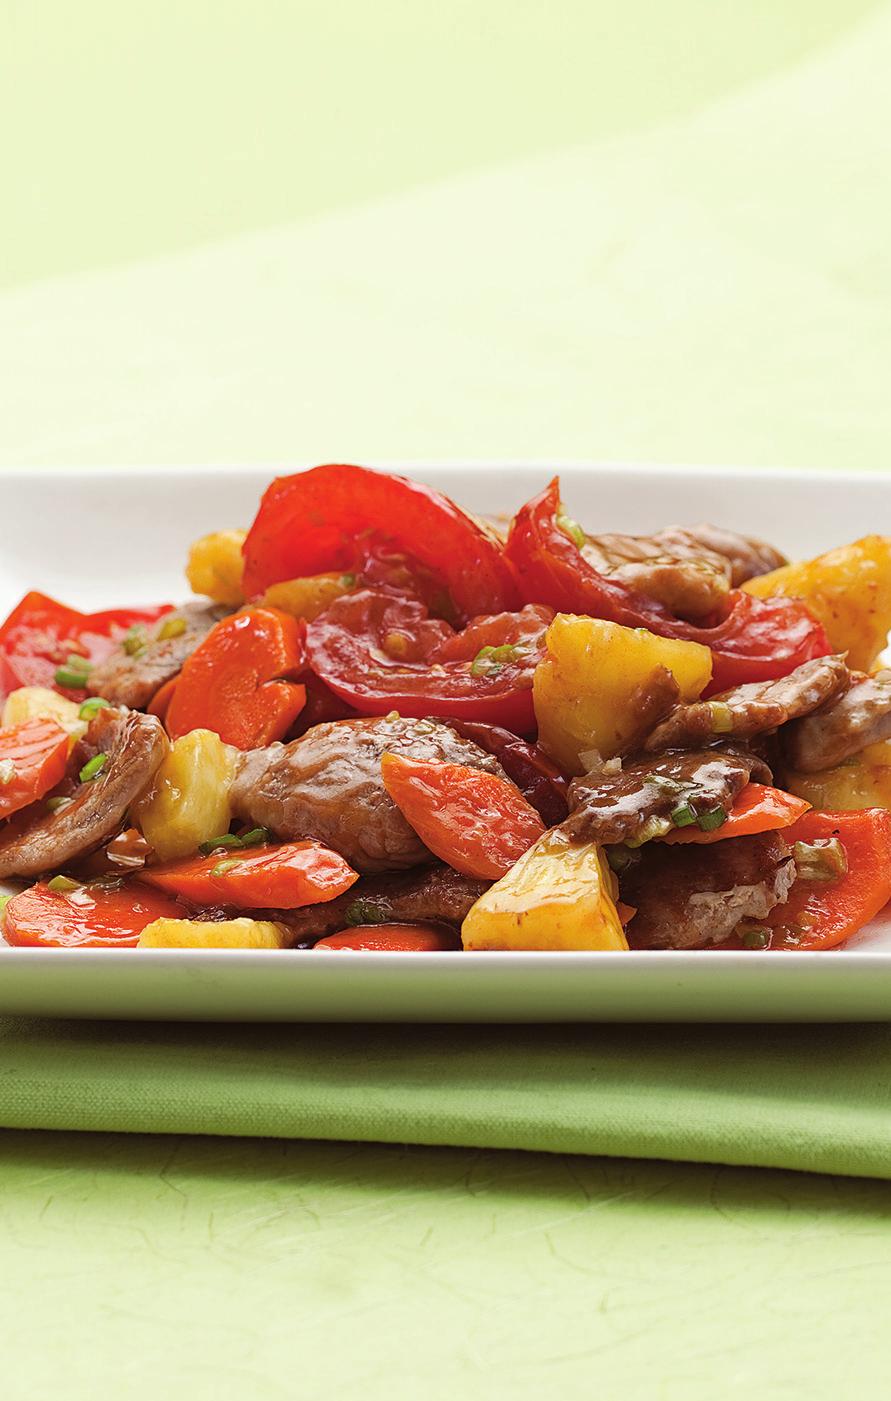 Sweet & Sour Pork Makes: 4 servings, about 11/4 cups each Active time: 45 minutes Total: 45 minutes Pineapple, tomato and pork combine in a sweet-tangy sauce in this easy, brightflavored sweet and